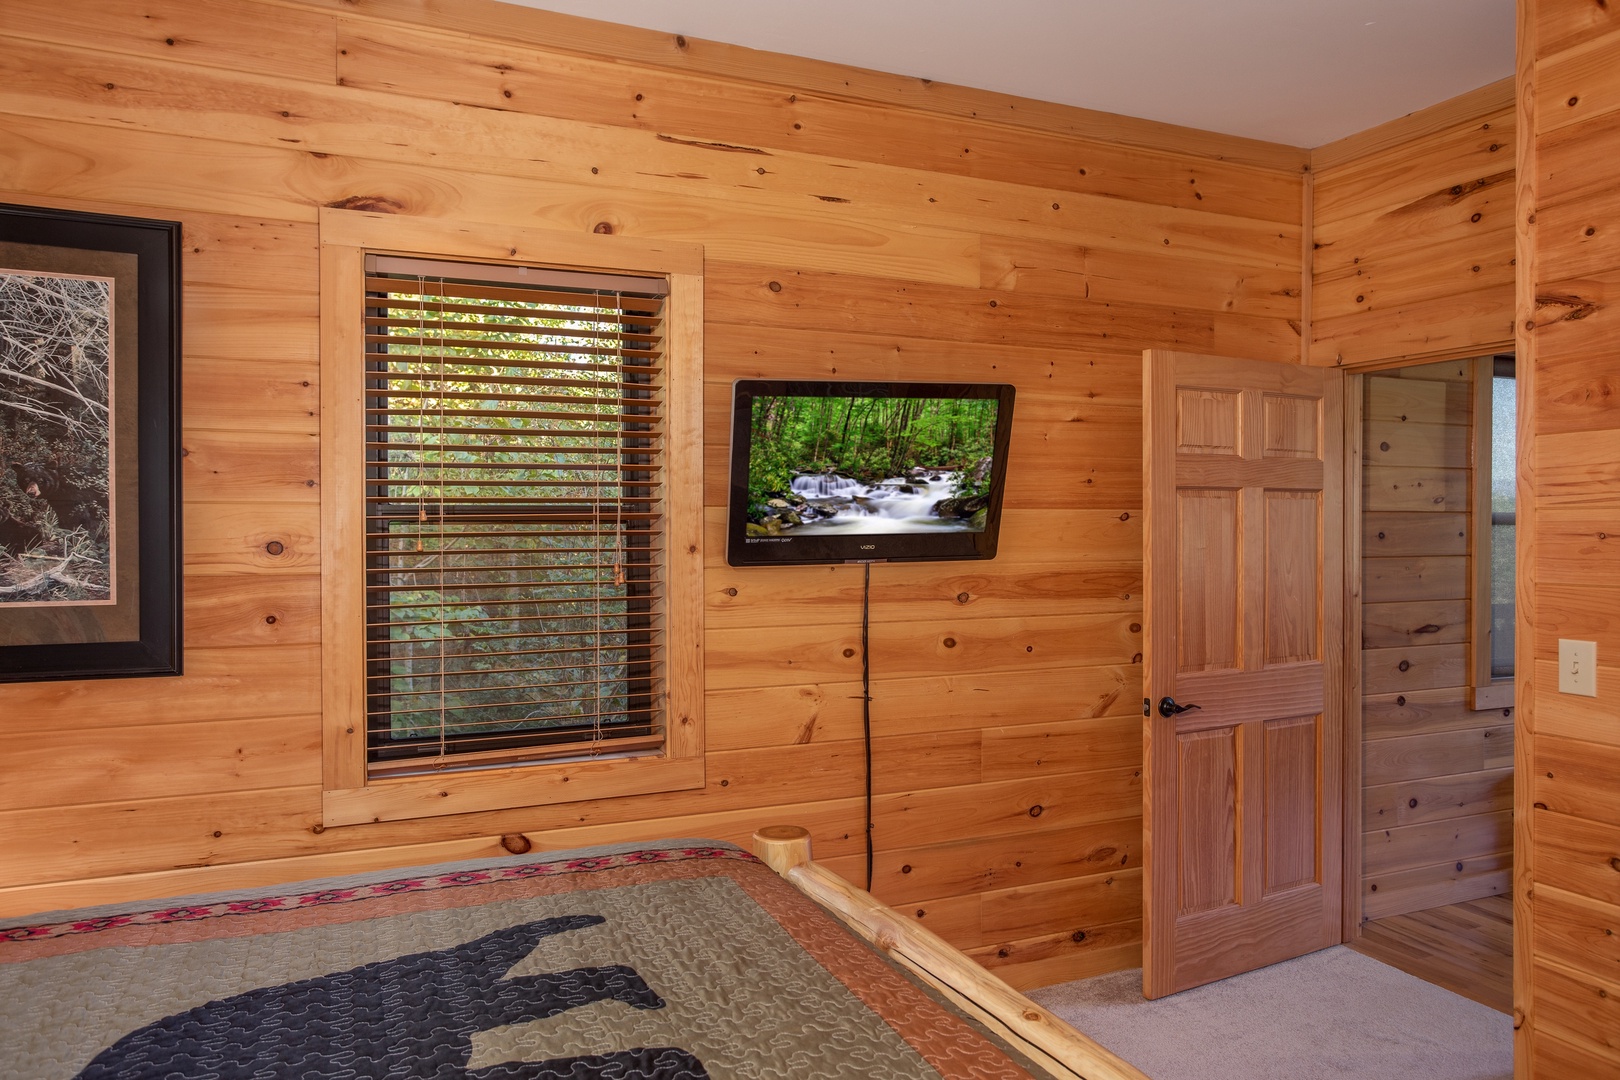 Wall mounted TV in a bedroom at Great View Lodge, a 5-bedroom cabin rental located in Pigeon Forge